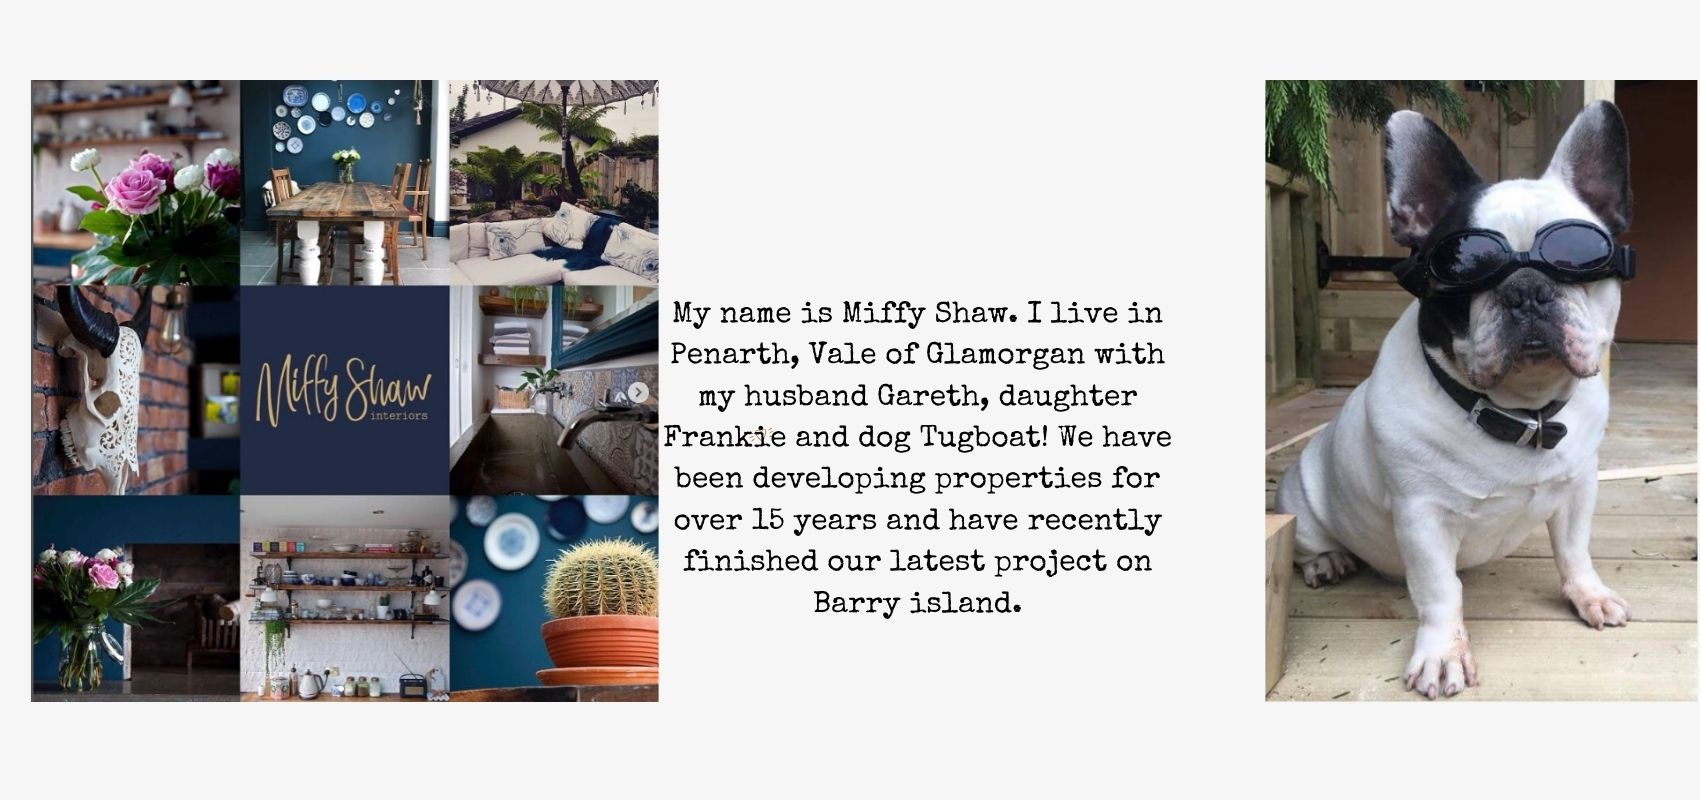 My name is Miffy Shaw. I live in Penarth, Vale of Glamorgan with my husband Gareth, daughter Frankie, and dog Tugboat! We have been developing properties for 15 years and have recently finished our latest product in Barry Island!